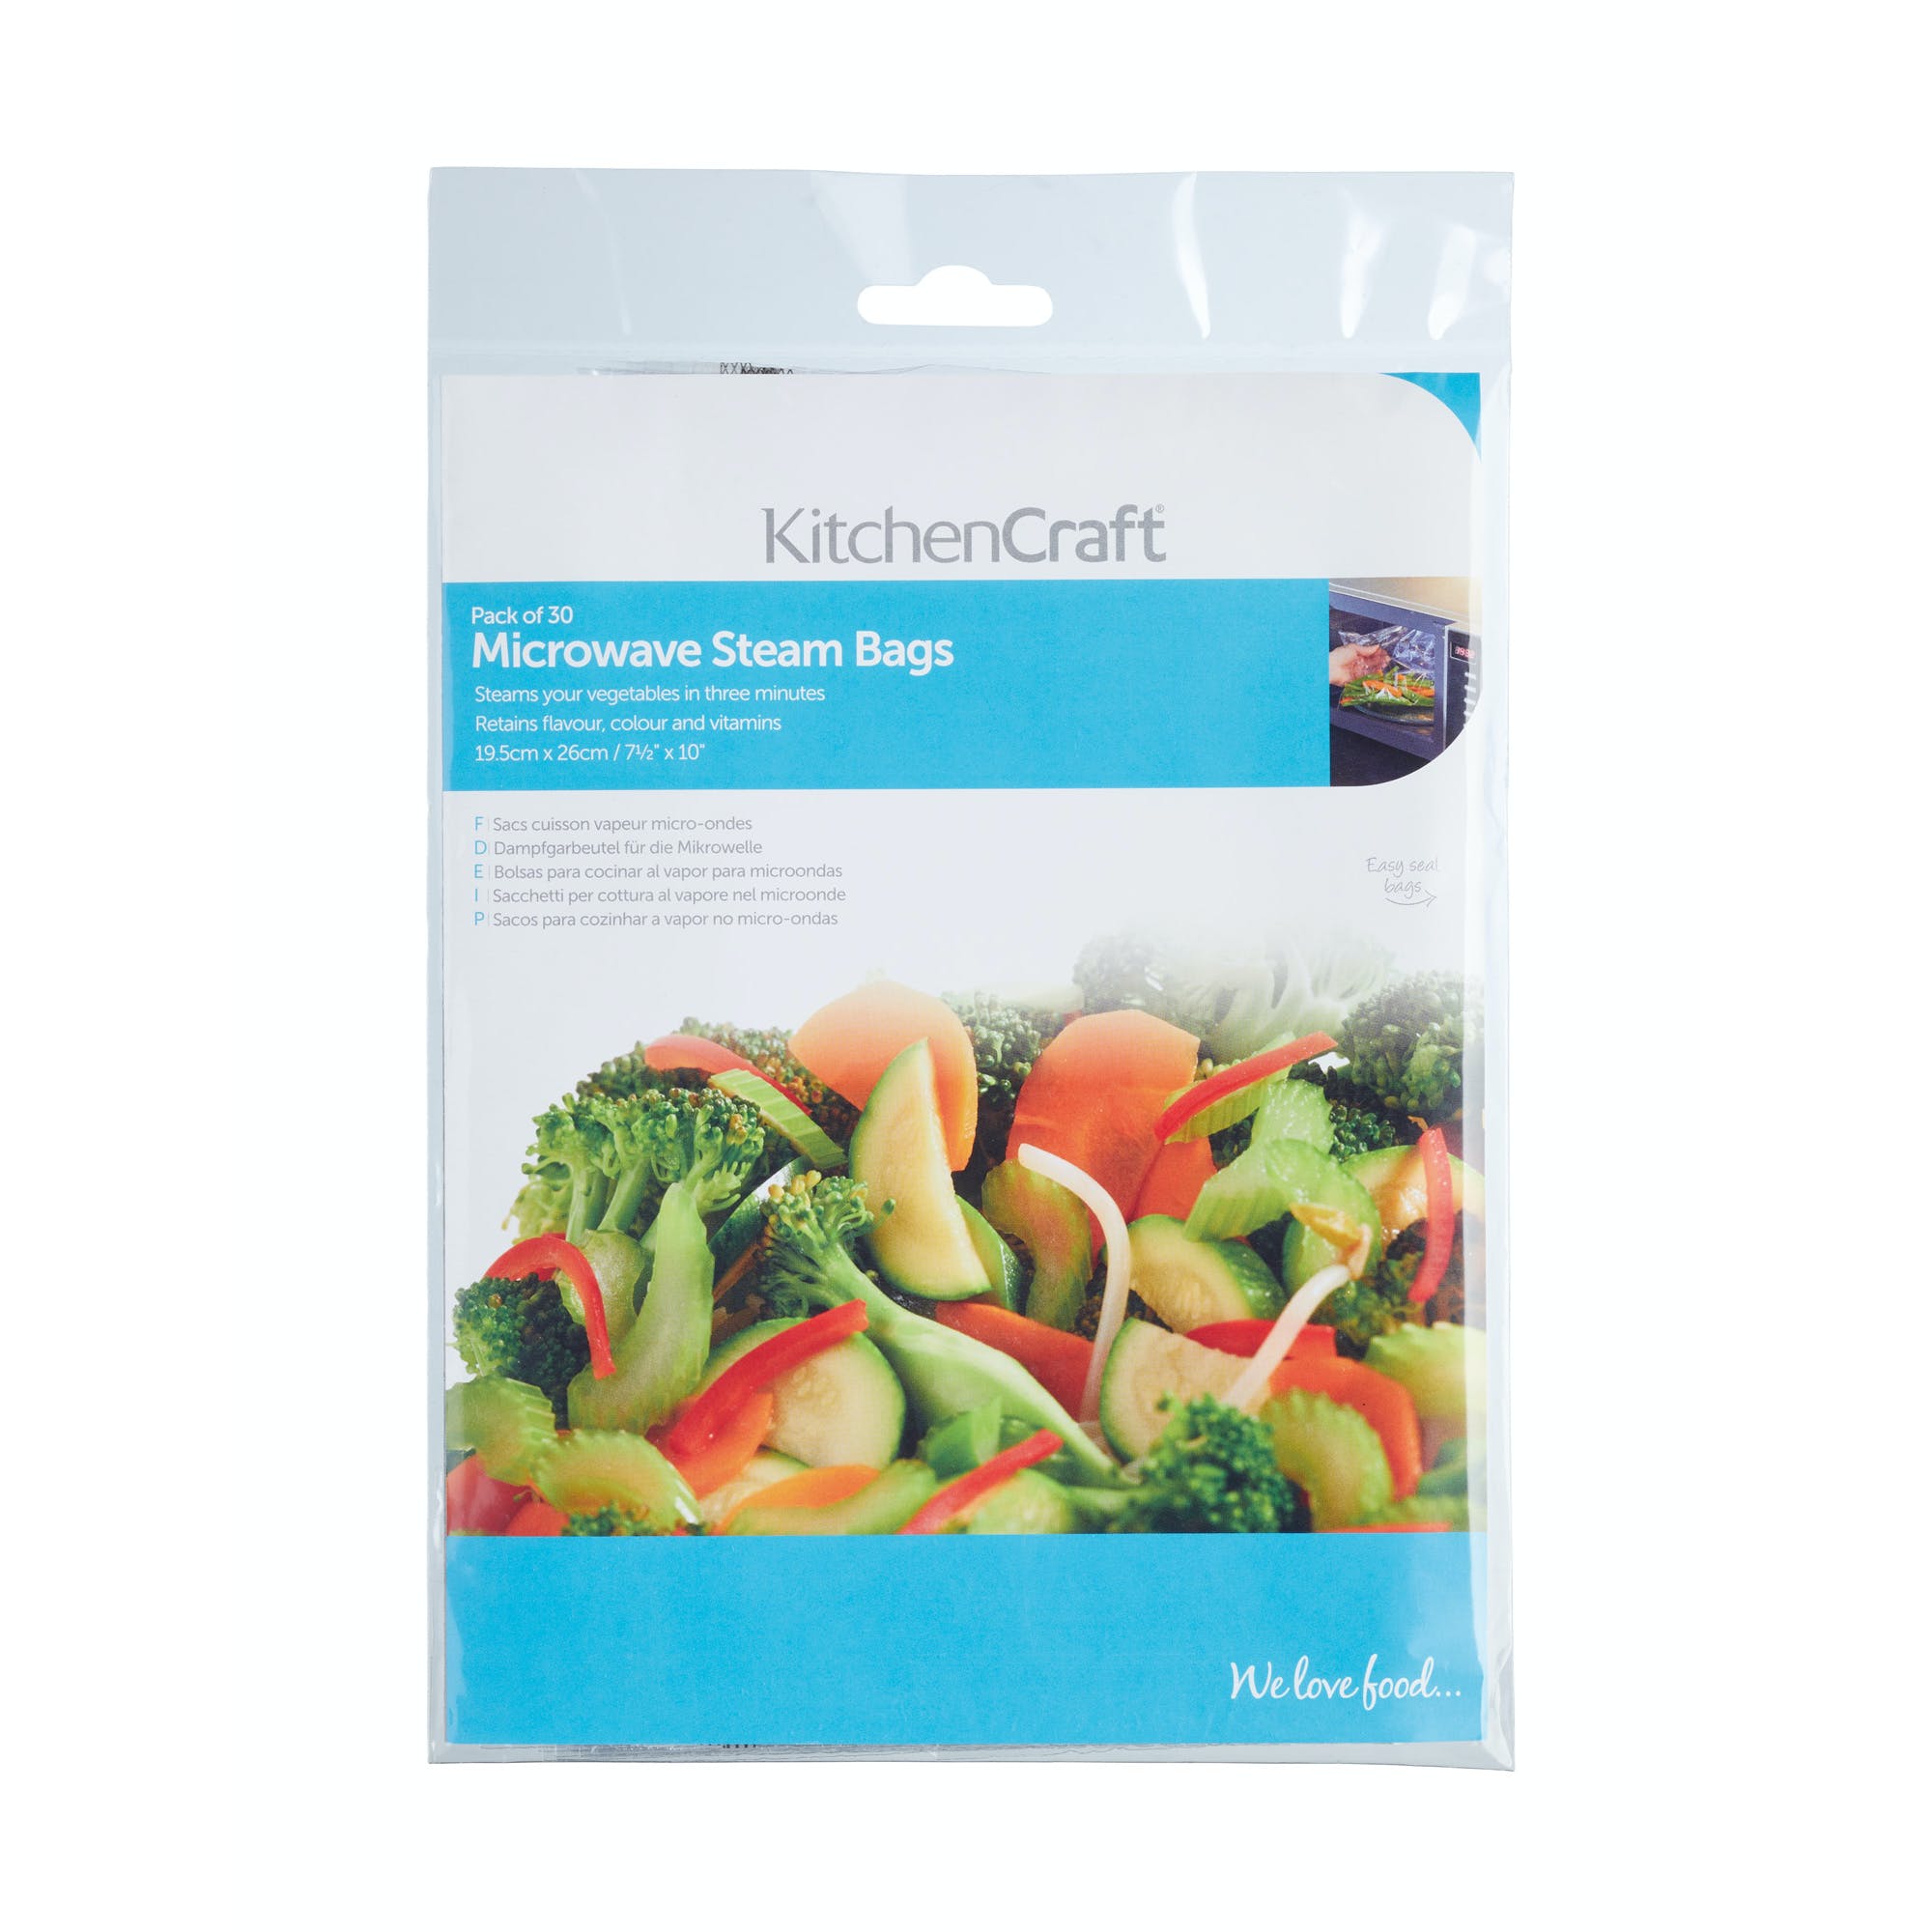 Kitchencraft Microwave Steam Bags - Pack of 30